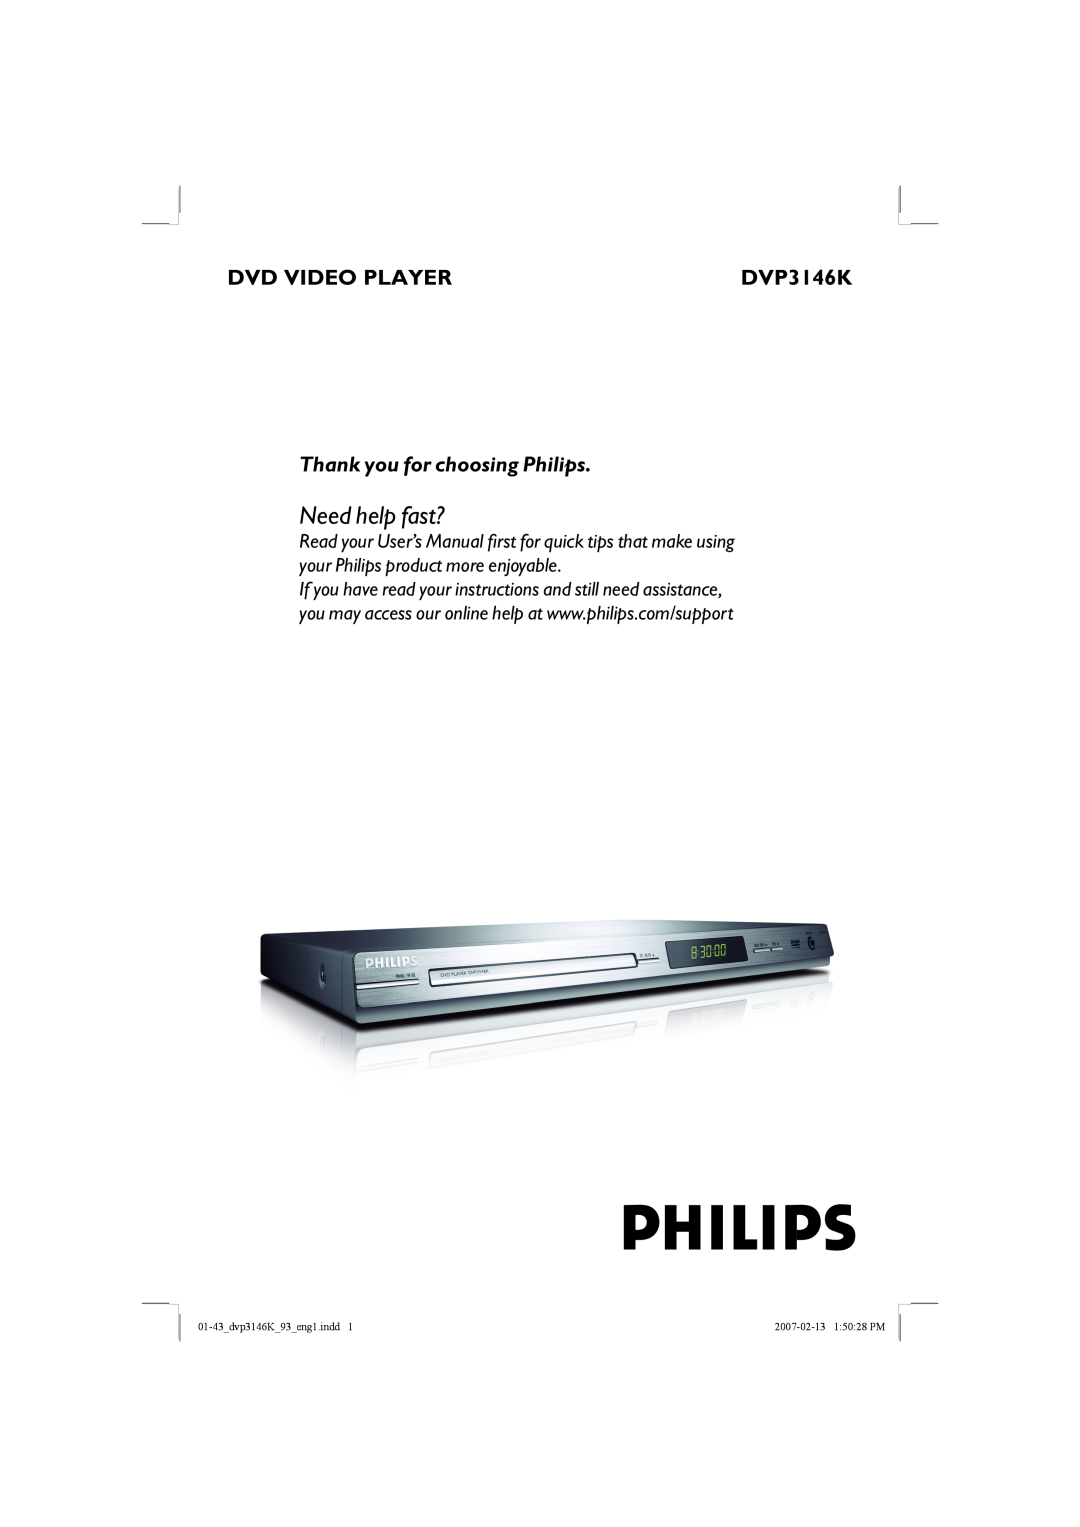 Philips DVP3146K/93 user manual Dvd Video Player, Need help fast?, Thank you for choosing Philips 